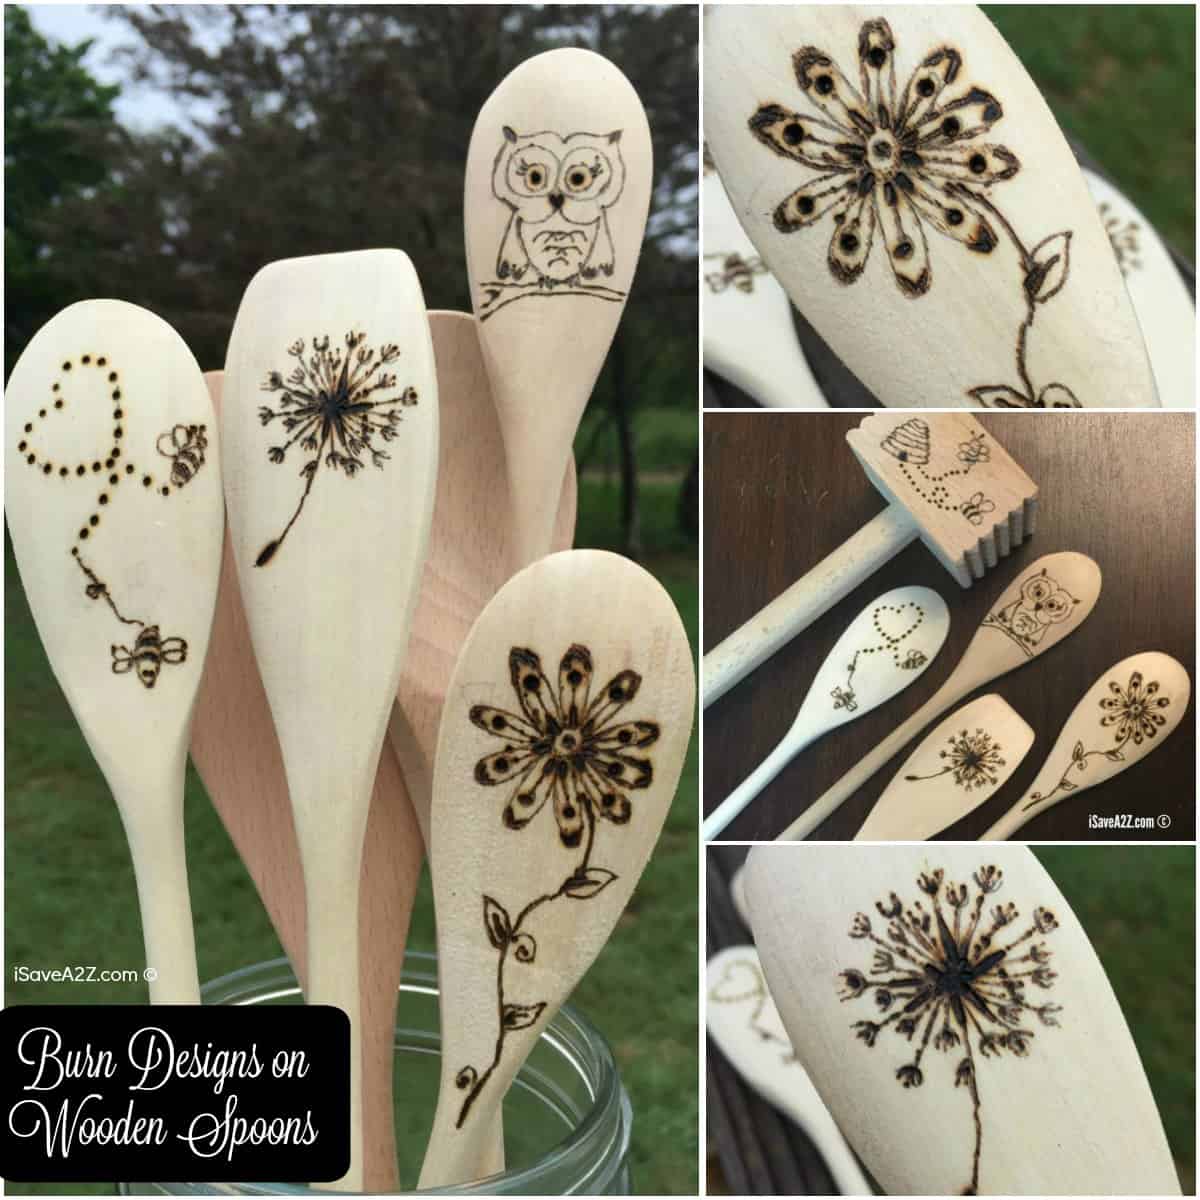 Mothers Day Gift idea of wooden spoons